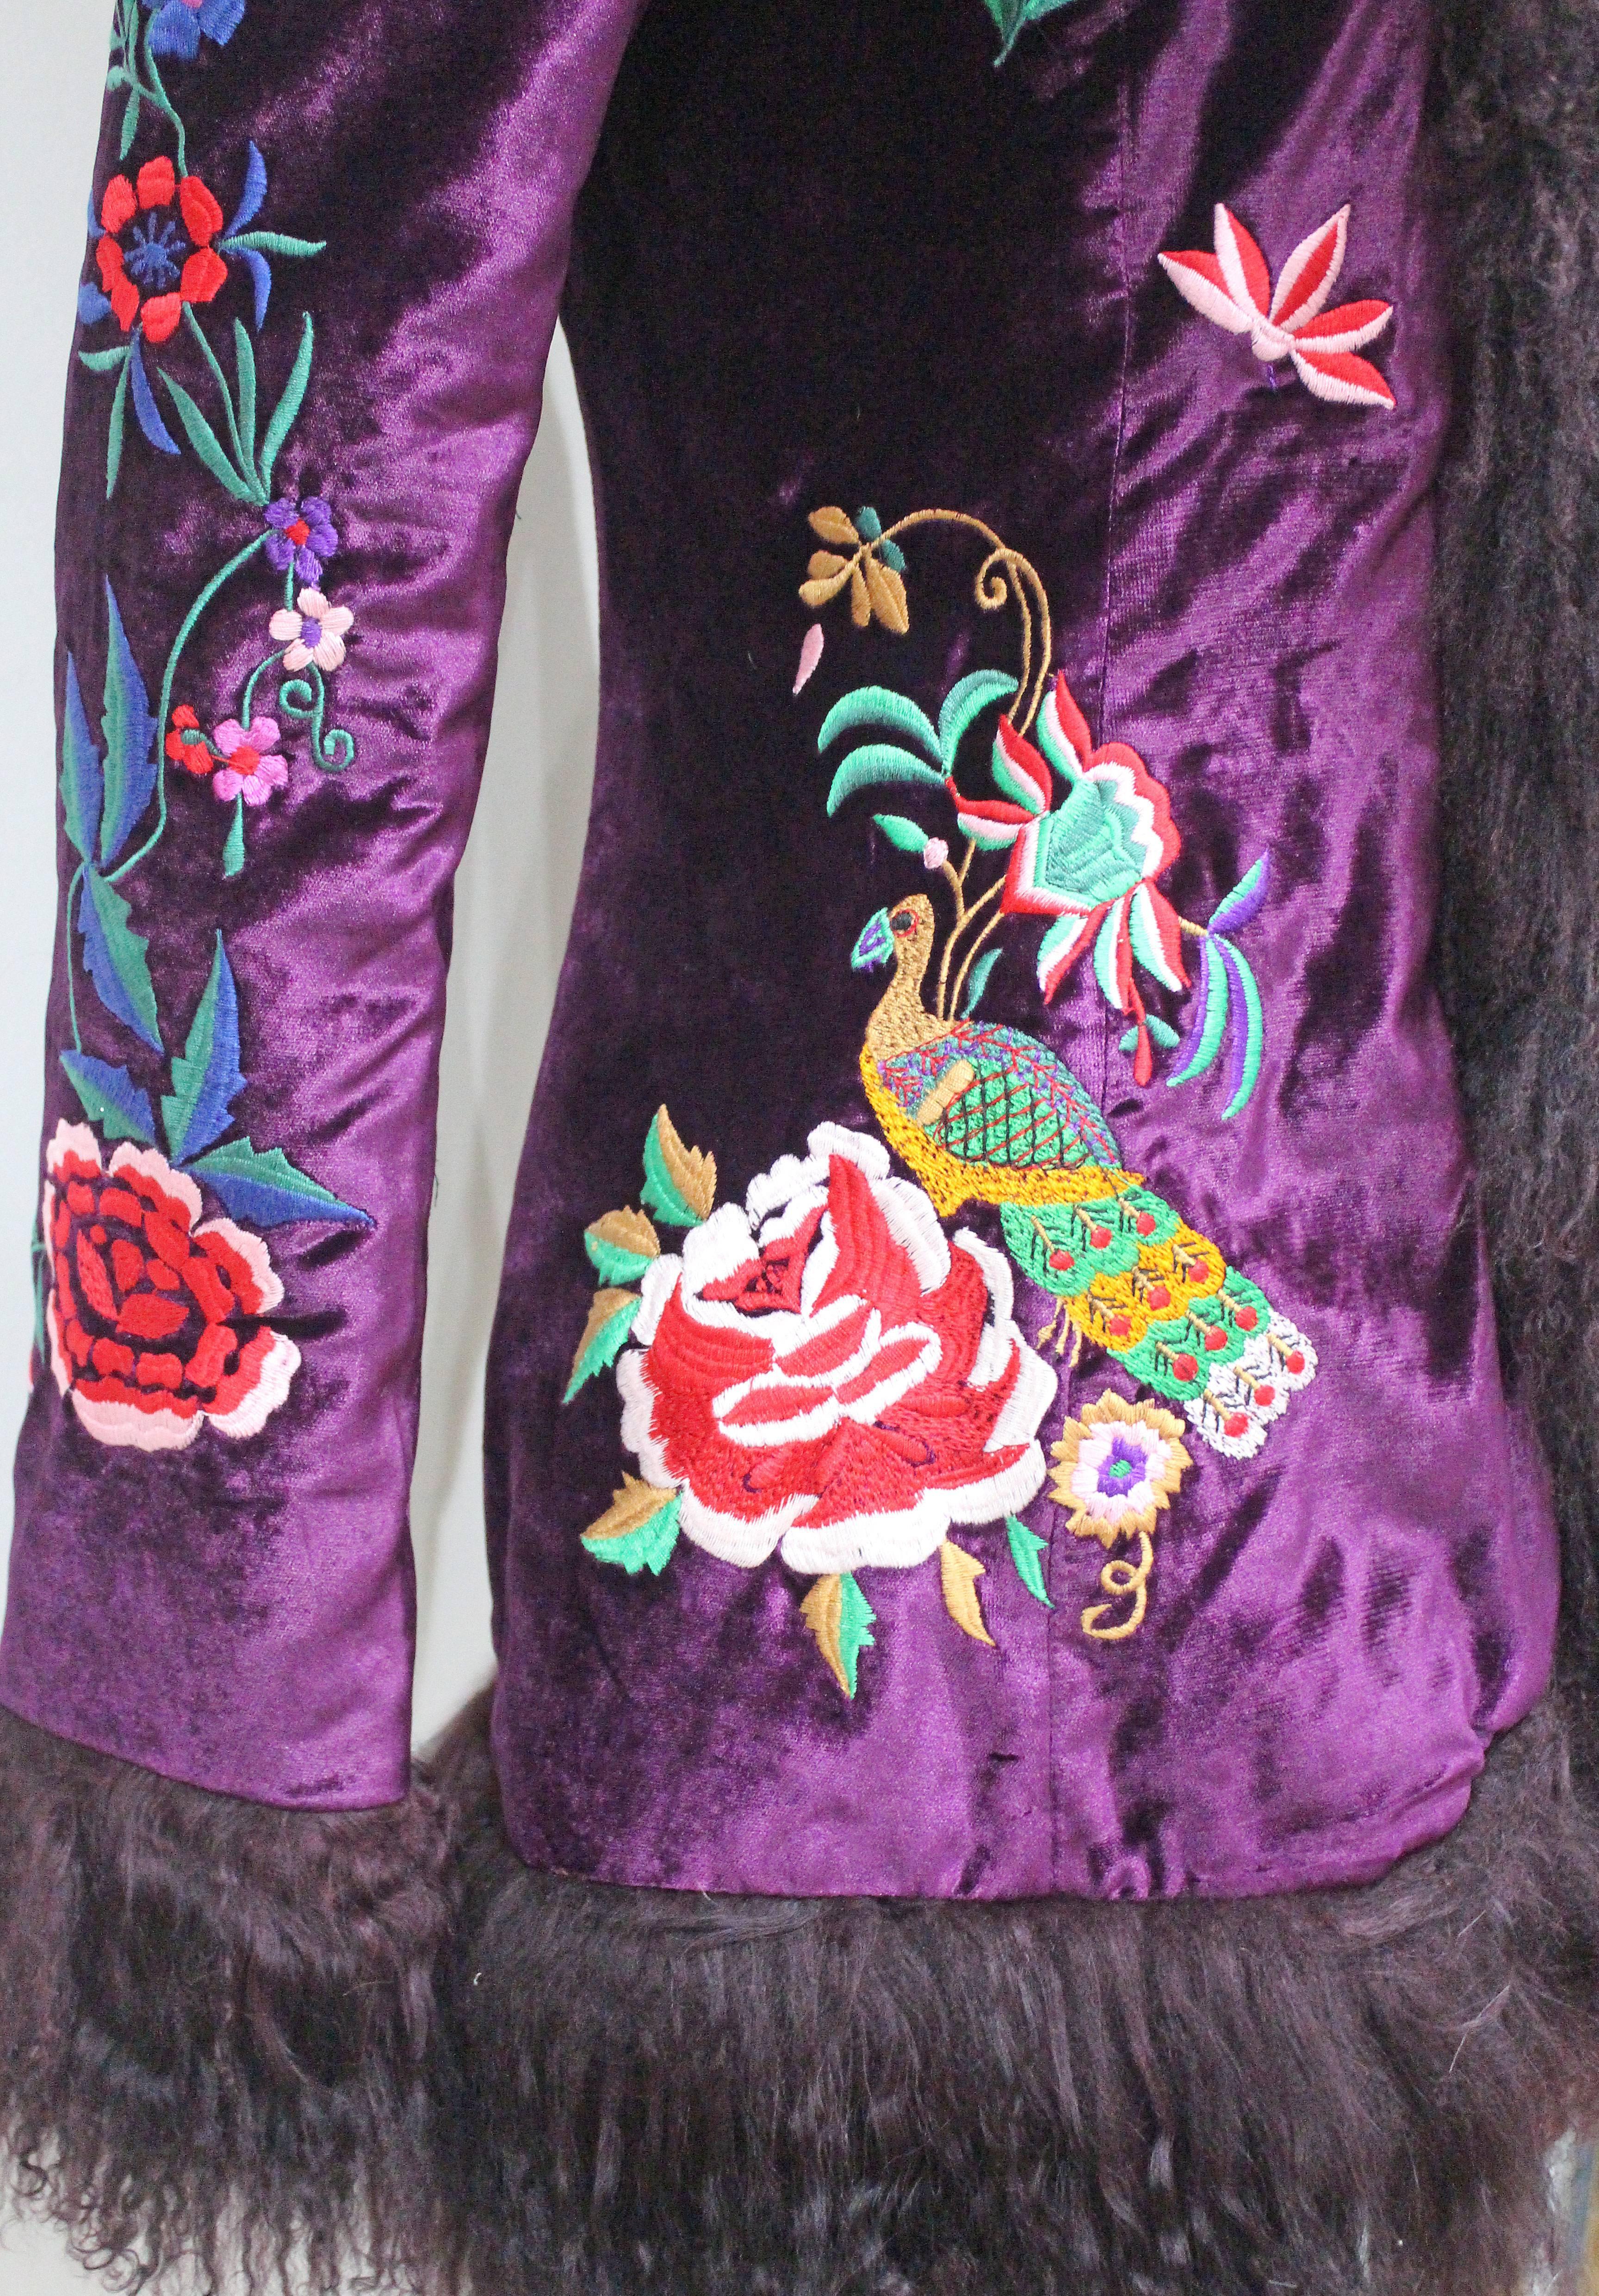 An exceptional evening jacket by 'D & G' - Dolce & Gabbana. The jacket is of a high quality purple velvet with beautiful embroidery through out in a signature Dolce & Gabbana style. The cuffs, collar and hem are all trimmed with Mongolian lamb fur.